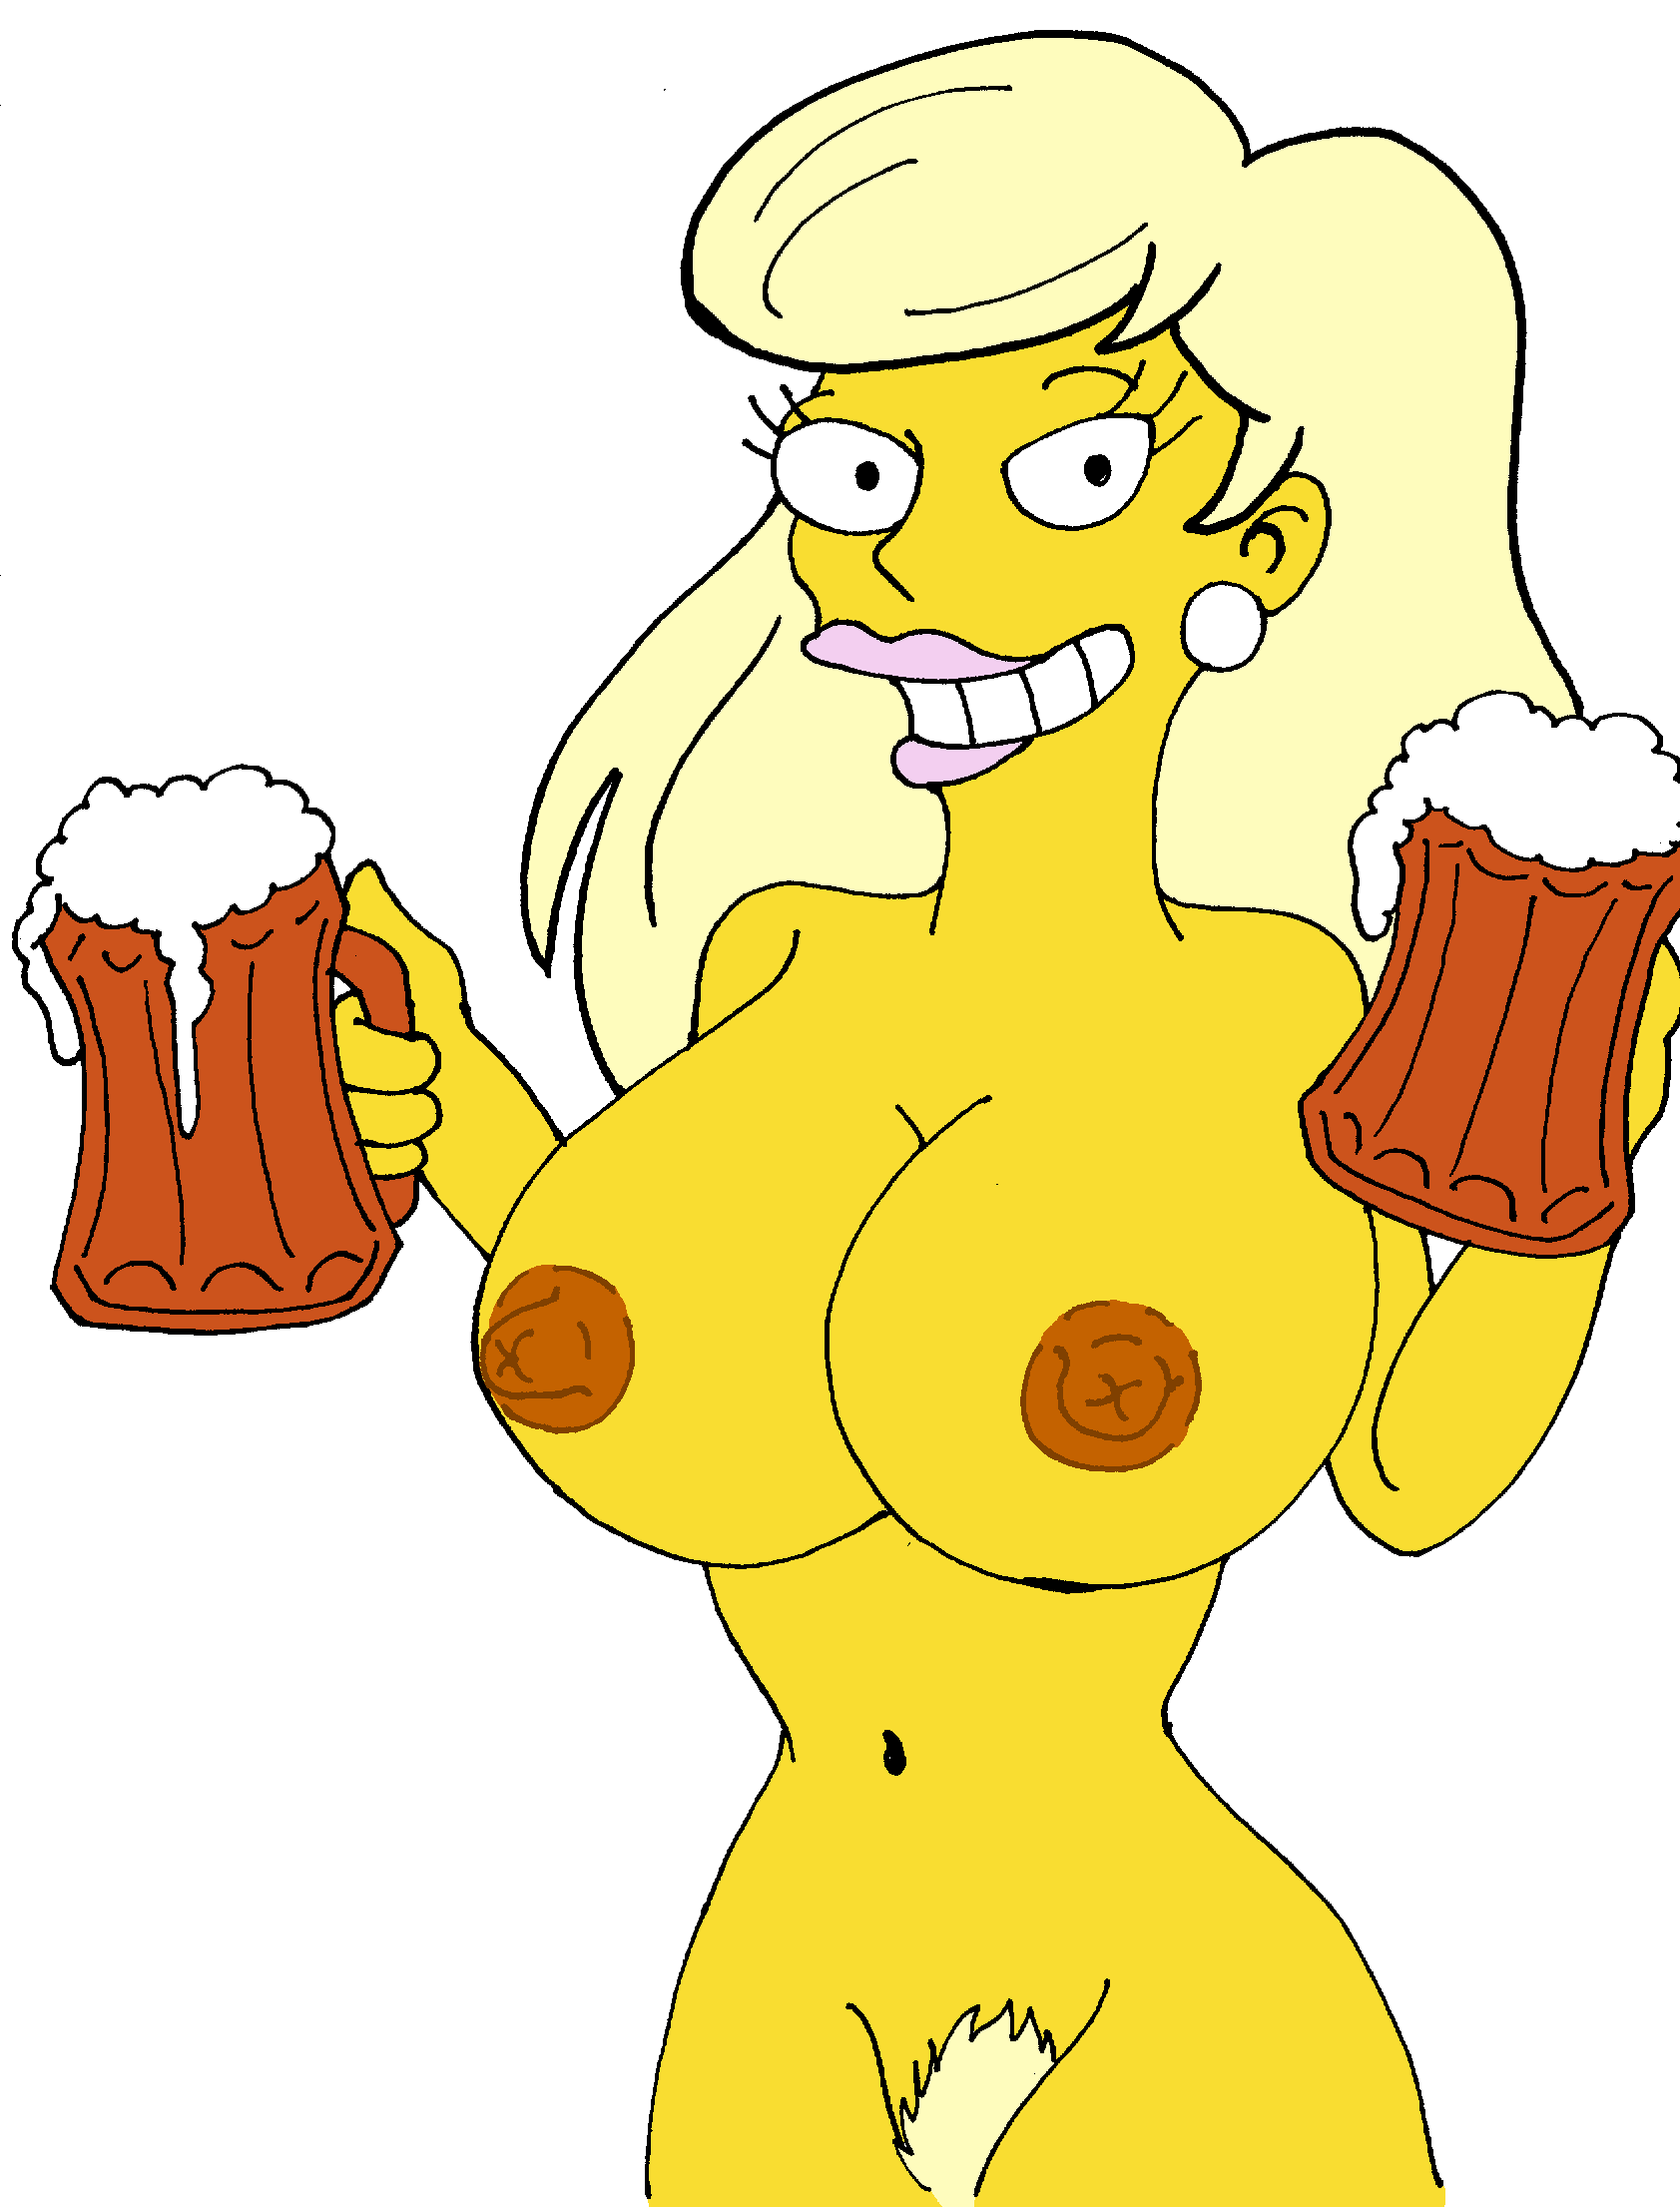 Of simpsons pictures naked the The Simpsons